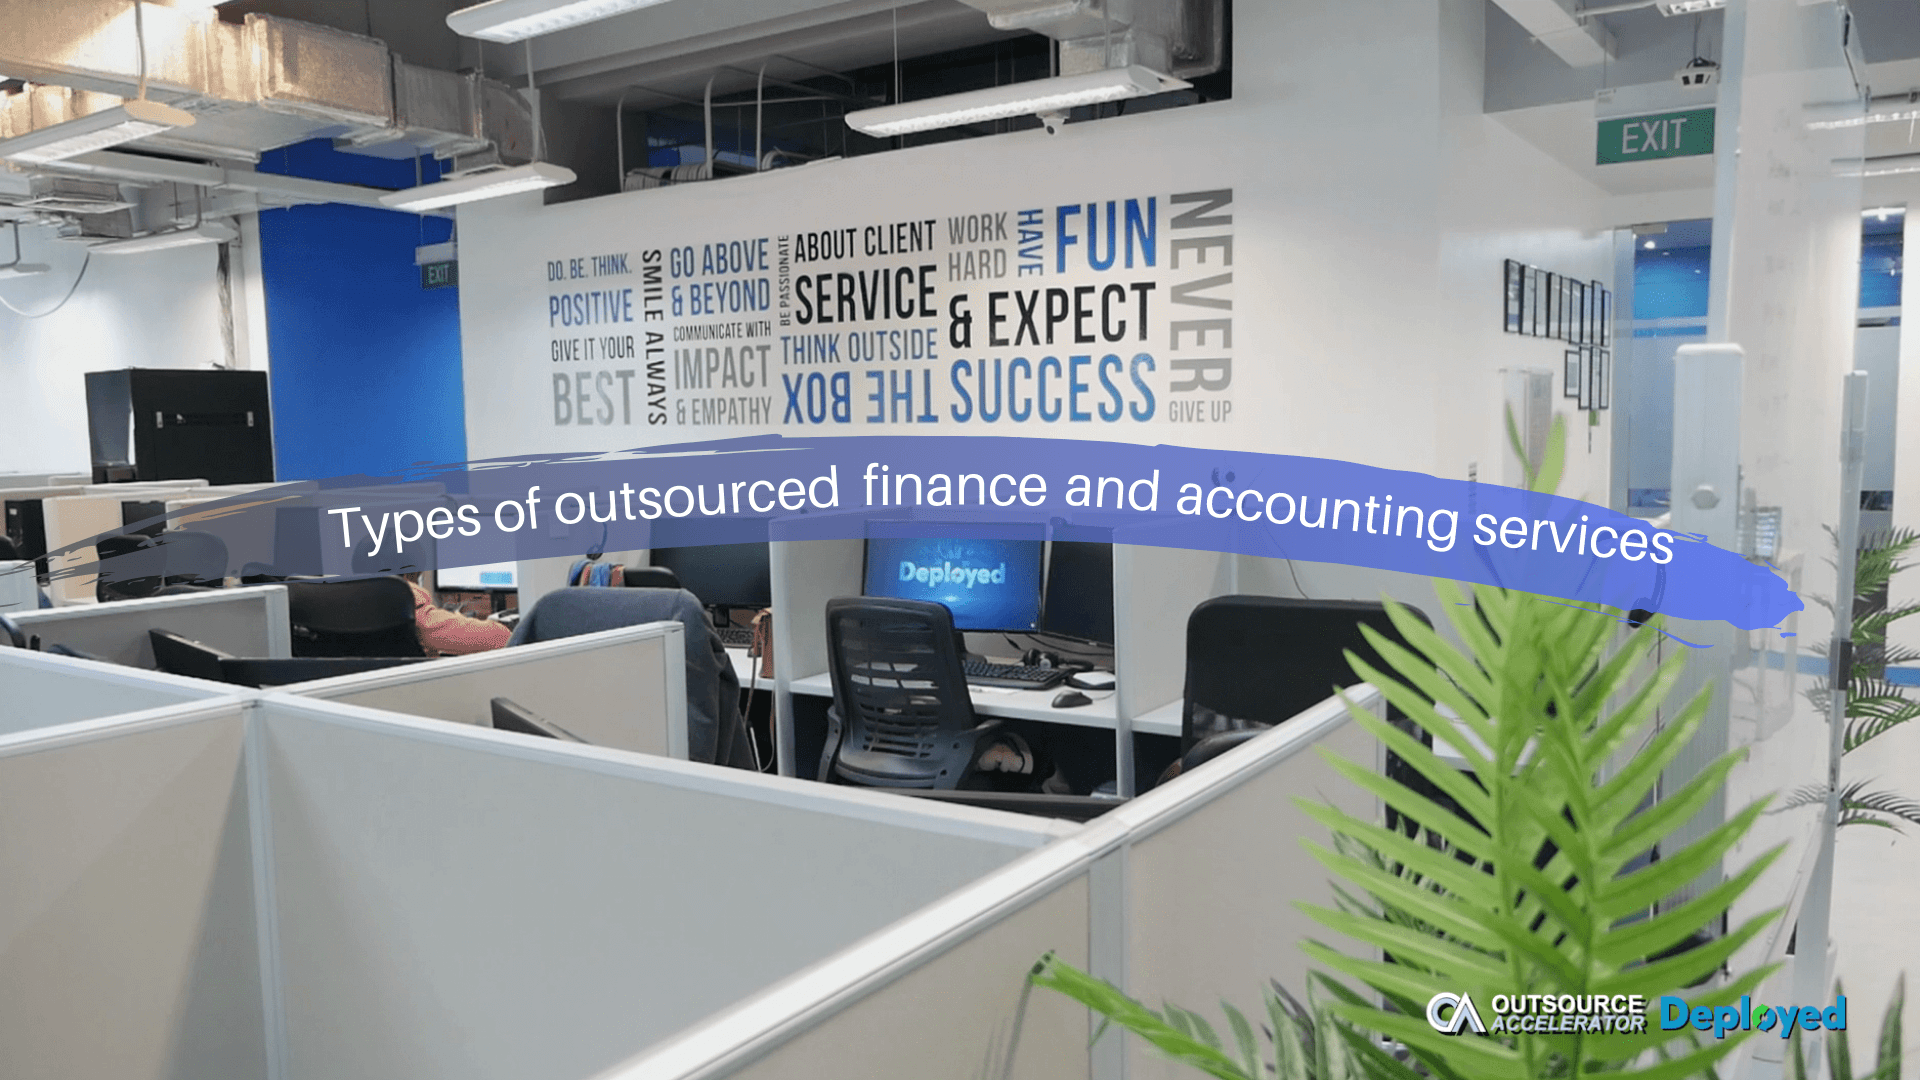 Types of outsourced finance and accounting services